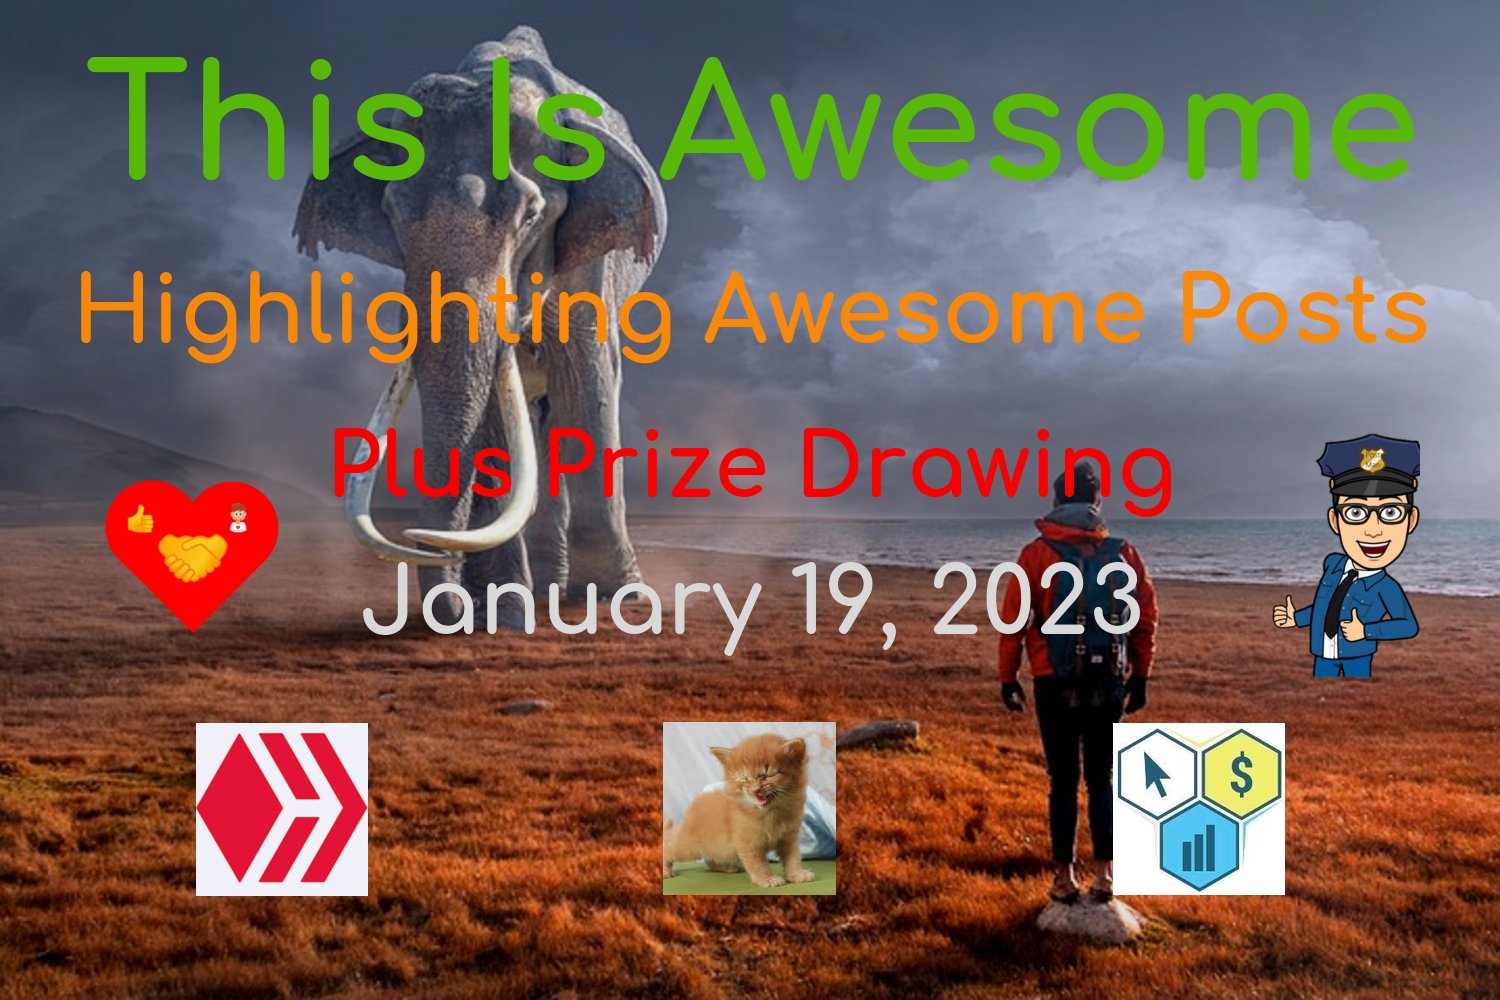 @thisisawesome/this-is-awesome-highlighting-awesome-posts-plus-prize-drawing-january-19-2023